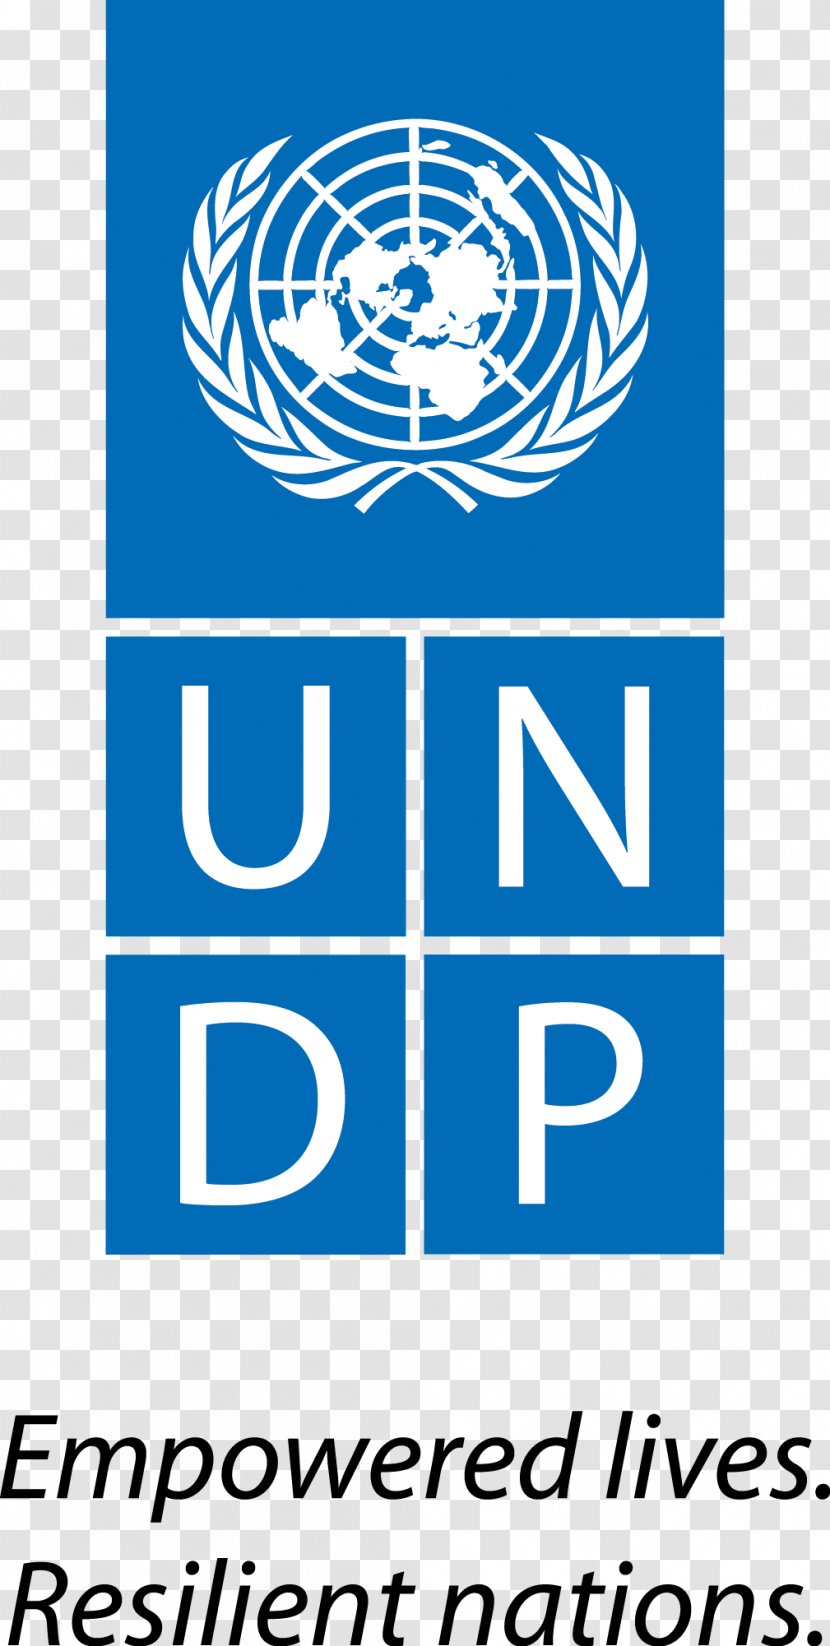 United Nations Development Programme Global Environment Facility Resident Coordinator Organization - Logo - Developing Country Transparent PNG